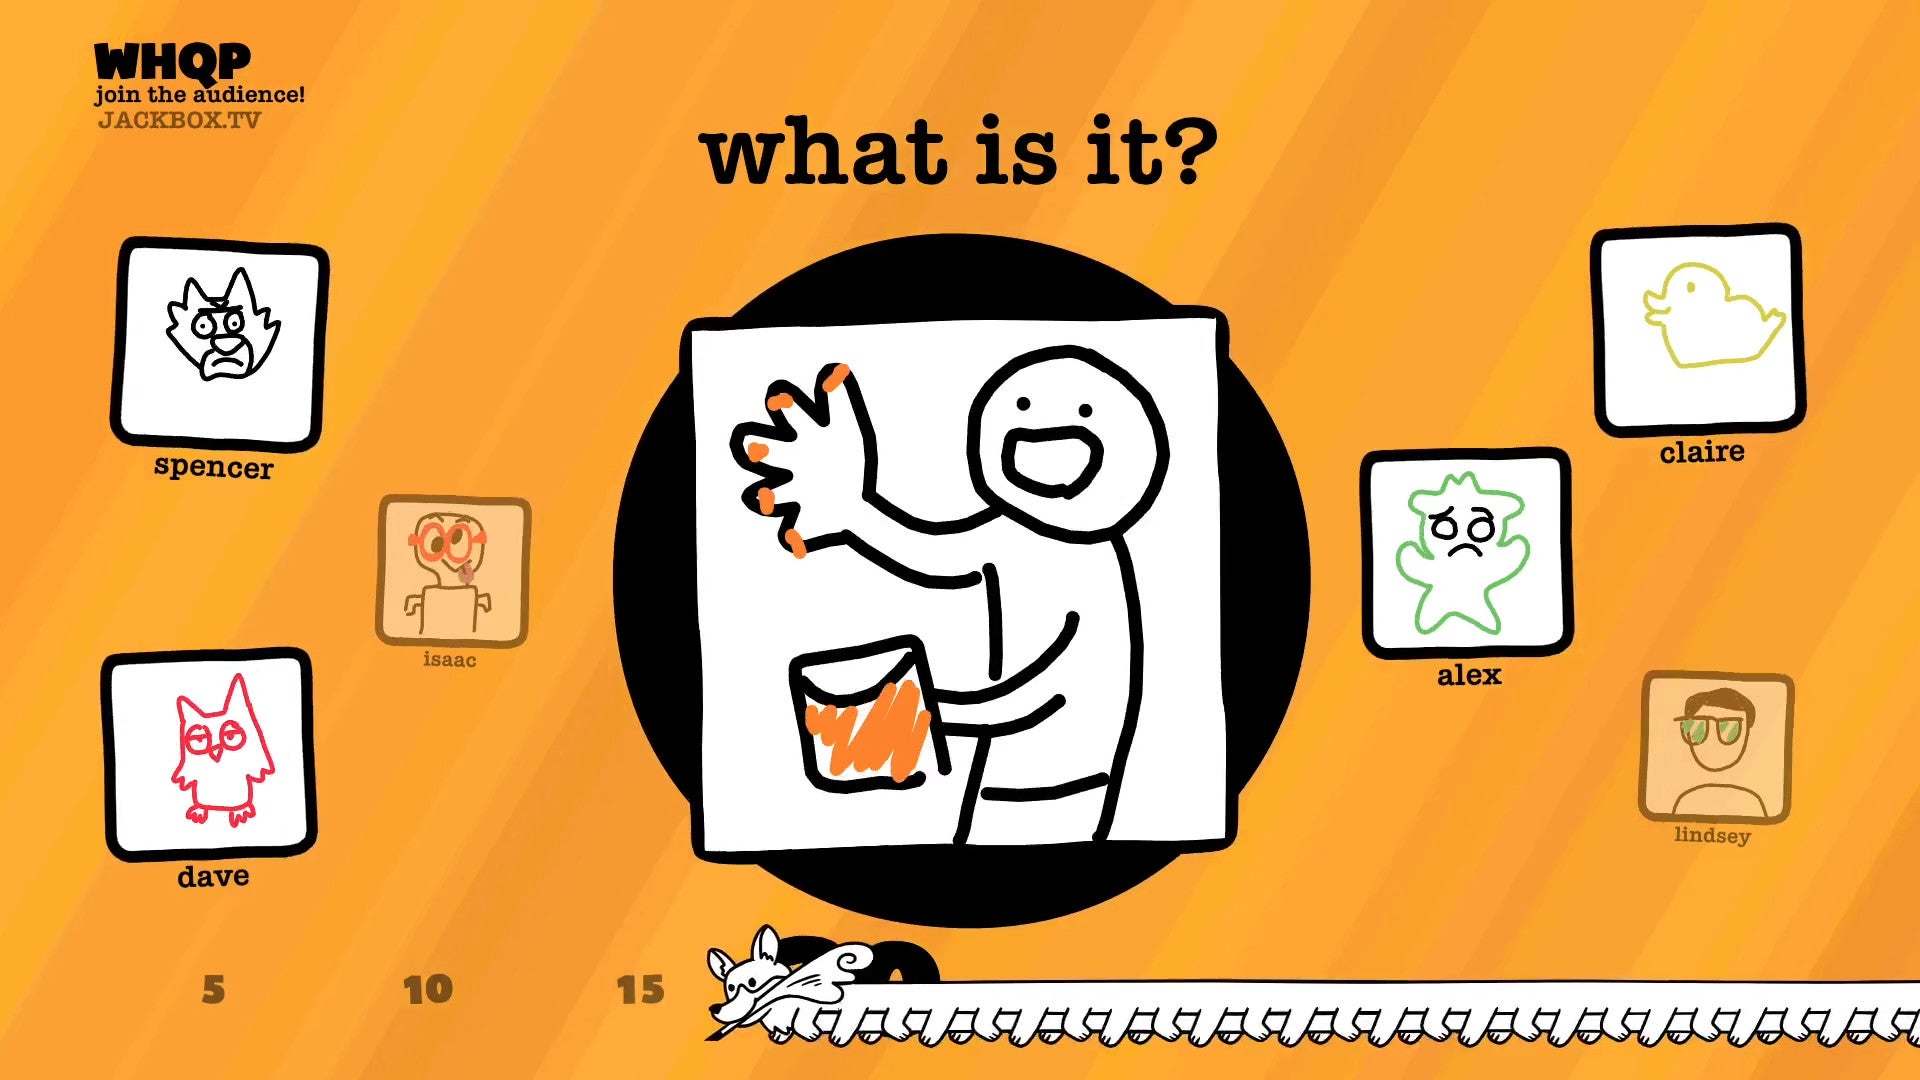 Guessing at a drawing in a screenshot from The Jackbox Party Pack 8.